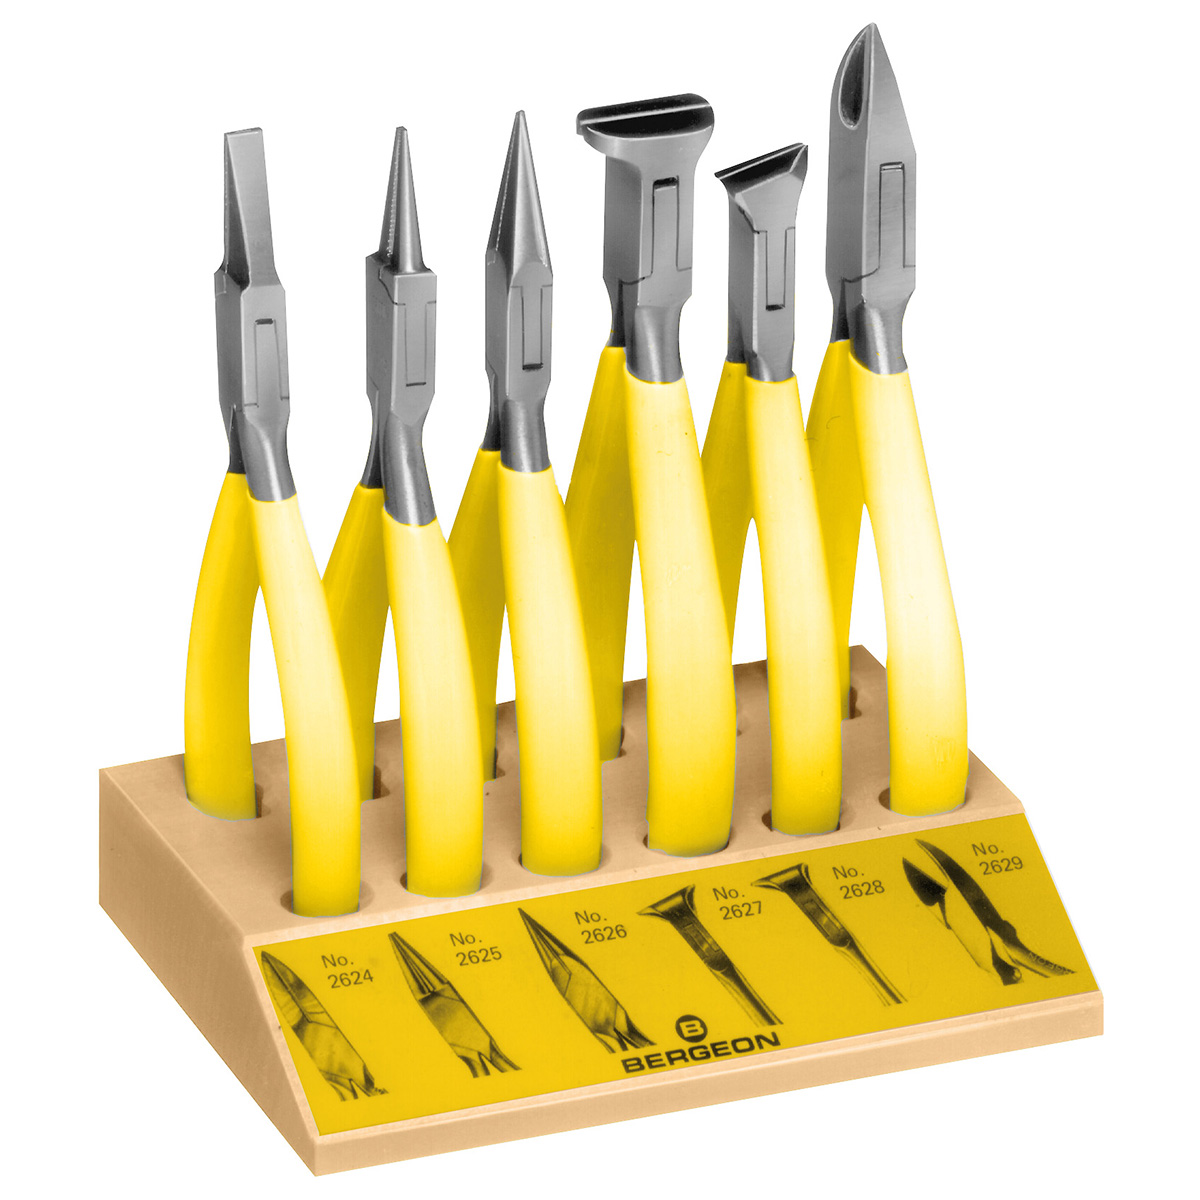 Bergeon 6283 Assortment of 6 pliers with cut